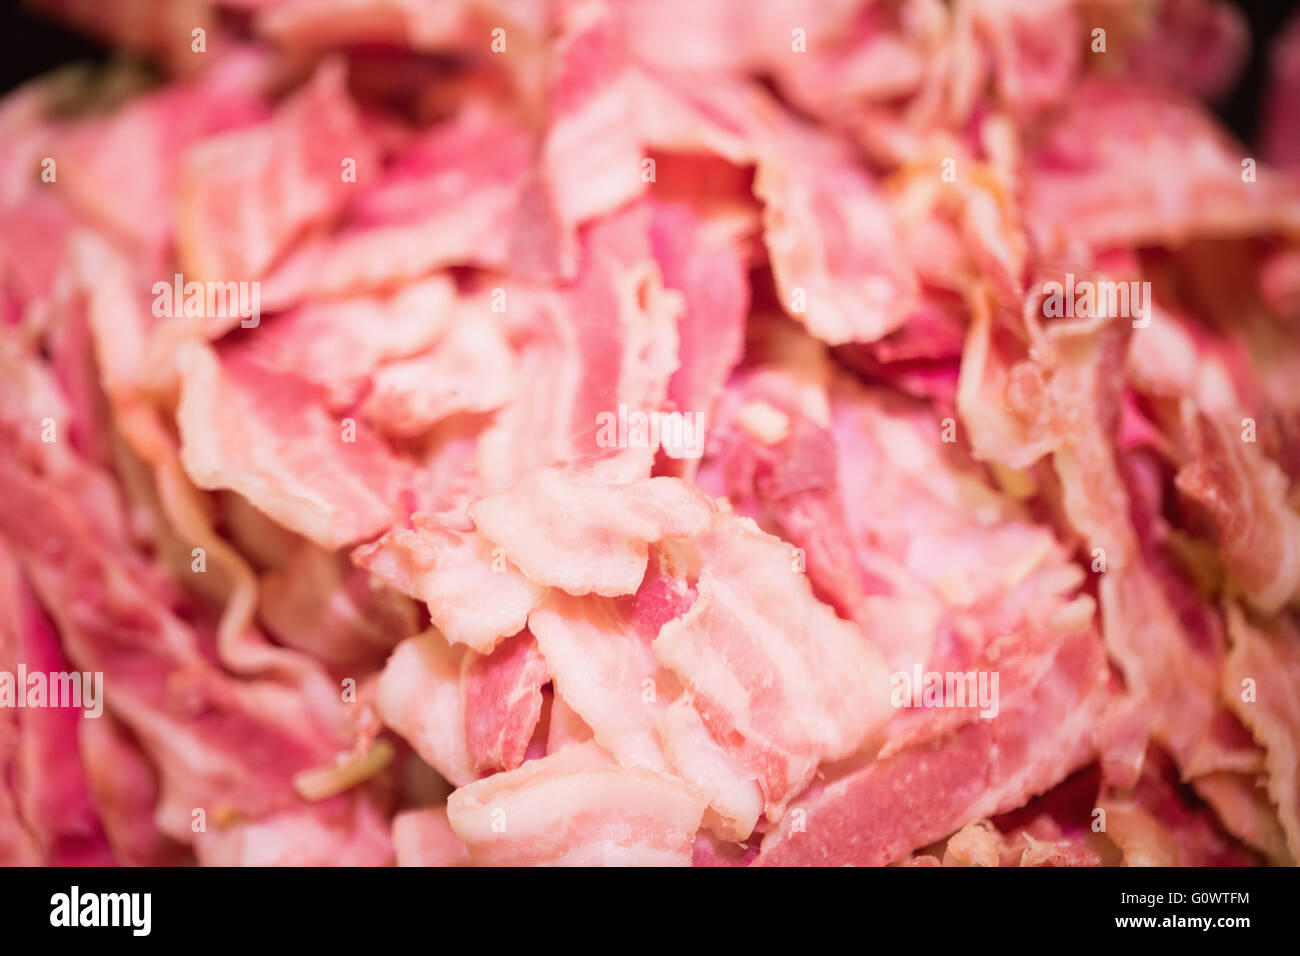 Focus on red meat gathering together Stock Photo